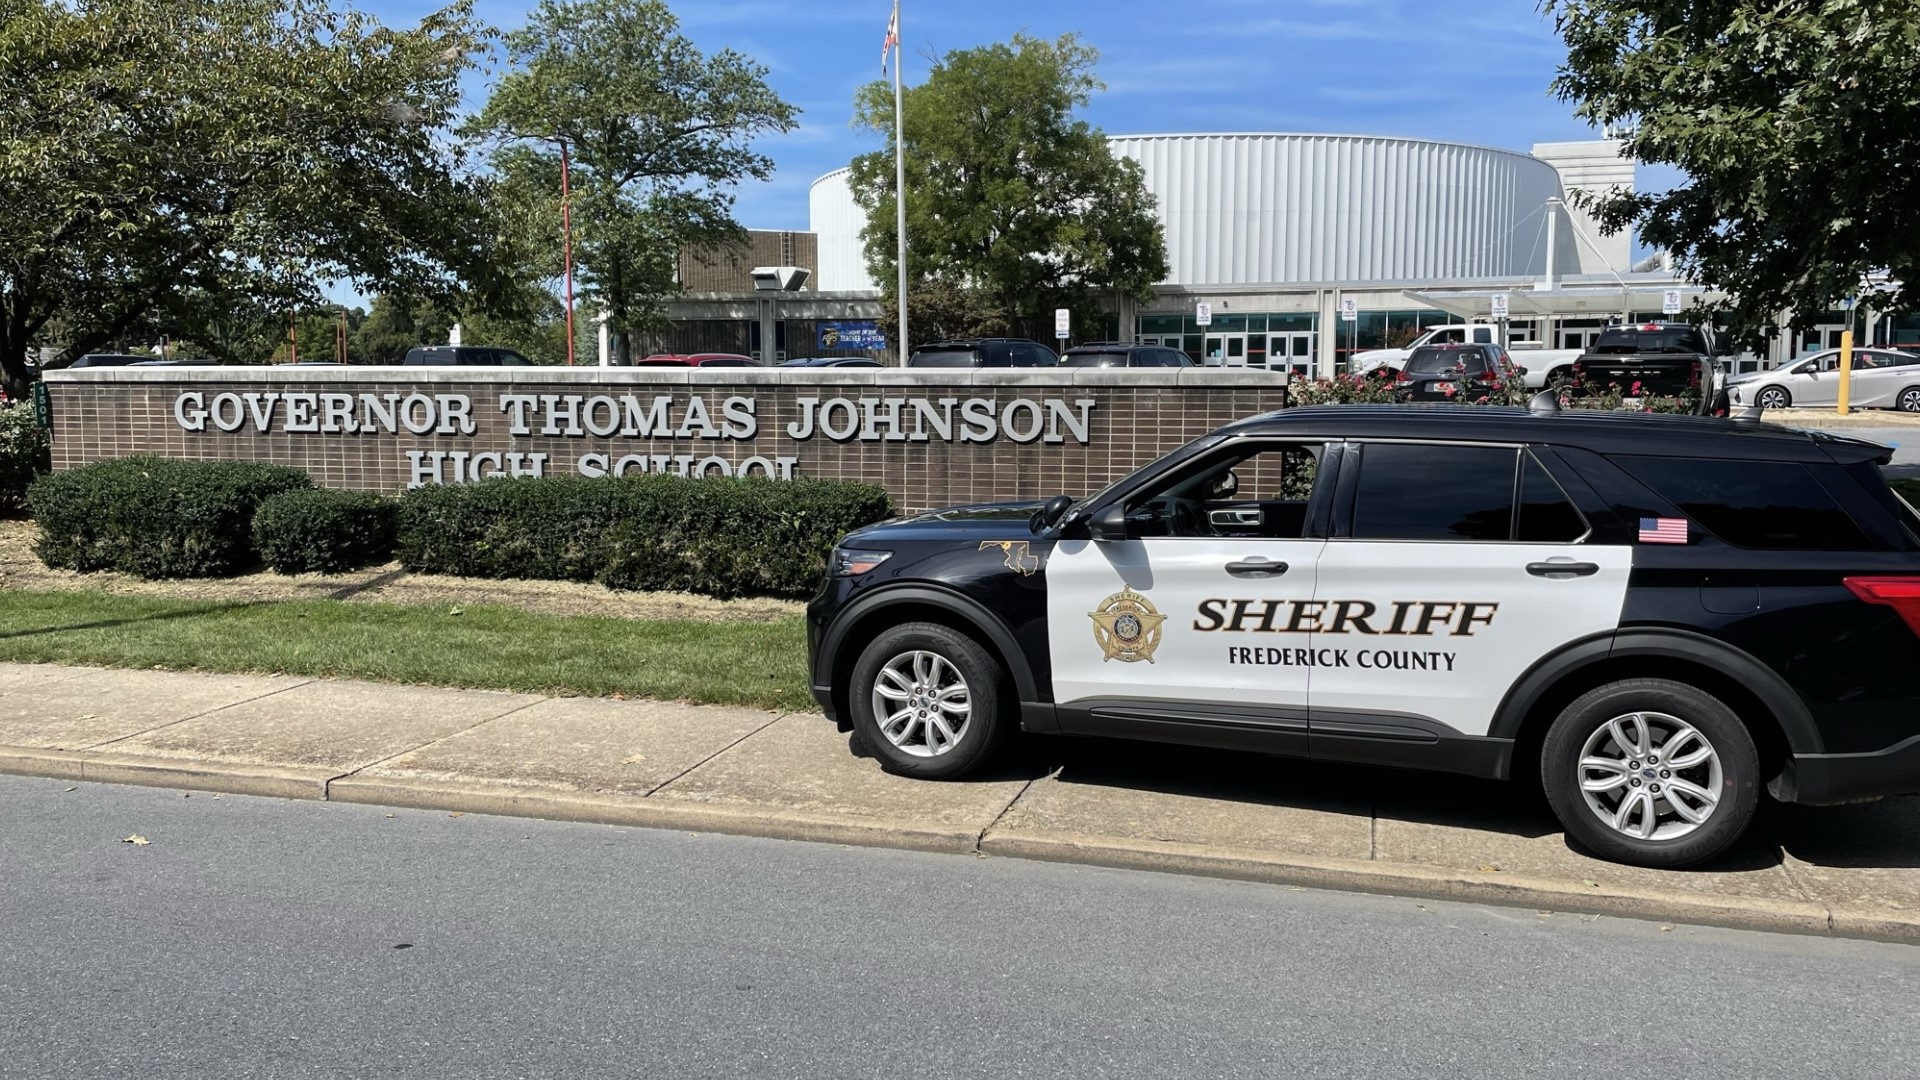 The year started off with school resource officers breaking up a fight between two students at Governor Thomas Johnson High School.